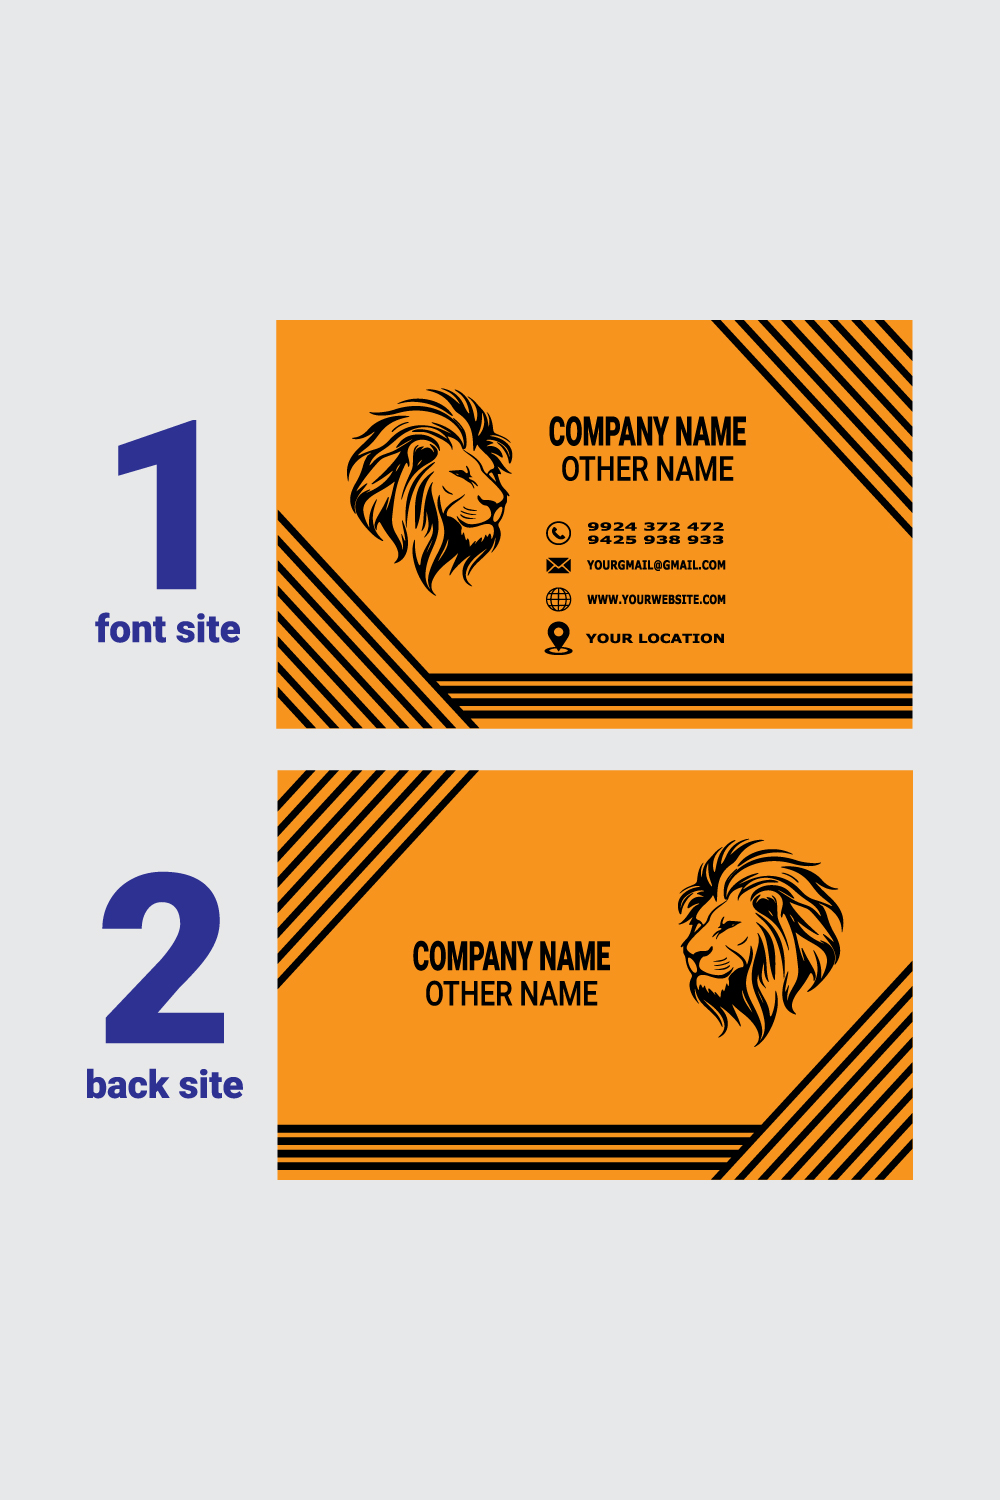 Business card design and illustration template vector, pinterest preview image.